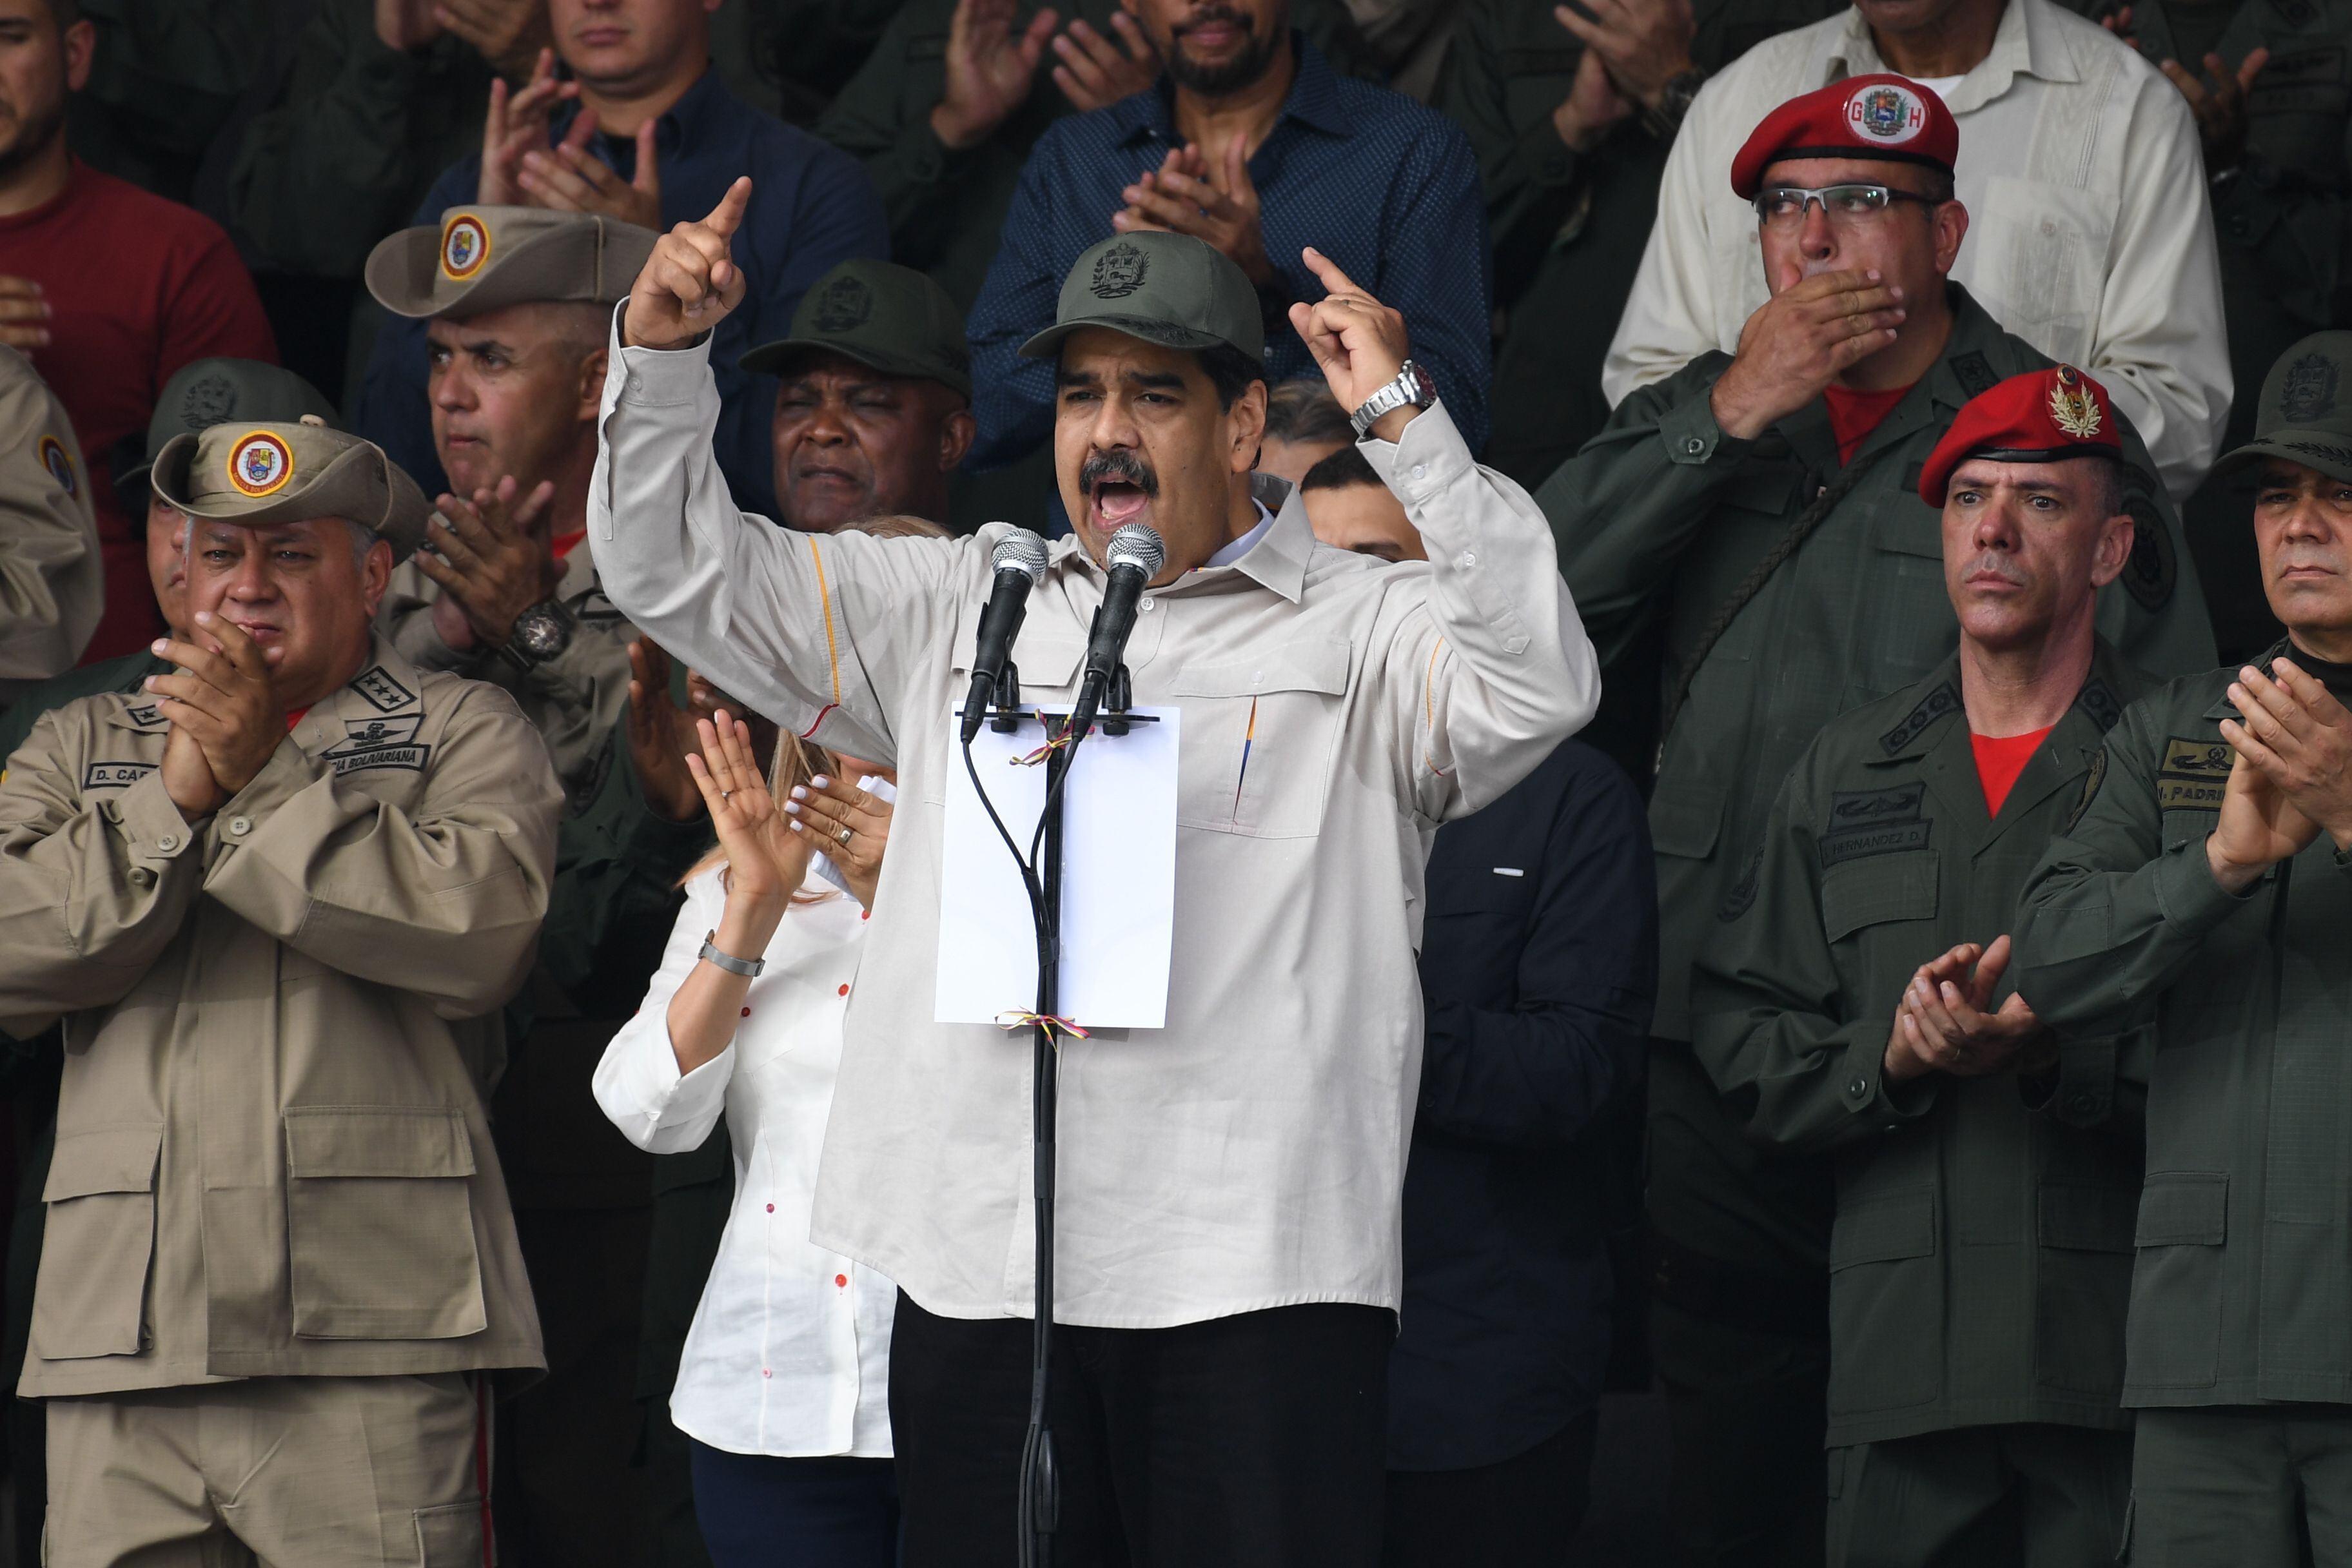 Venezuelan President Nicolas Maduro (C), flanked by the president of the ruling Constituent Assembly Diosdado Cabello (L) and Defence Minister Vladimir Padrino (far R), during a military parade to commemorate the 17th anniversary of a failed 2002 coup d'�tat against former leader Hugo Chavez, at Fuerte Tiuna Military Complex, in Caracas on April 13, 2019. (Photo by Yuri CORTEZ / AFP)